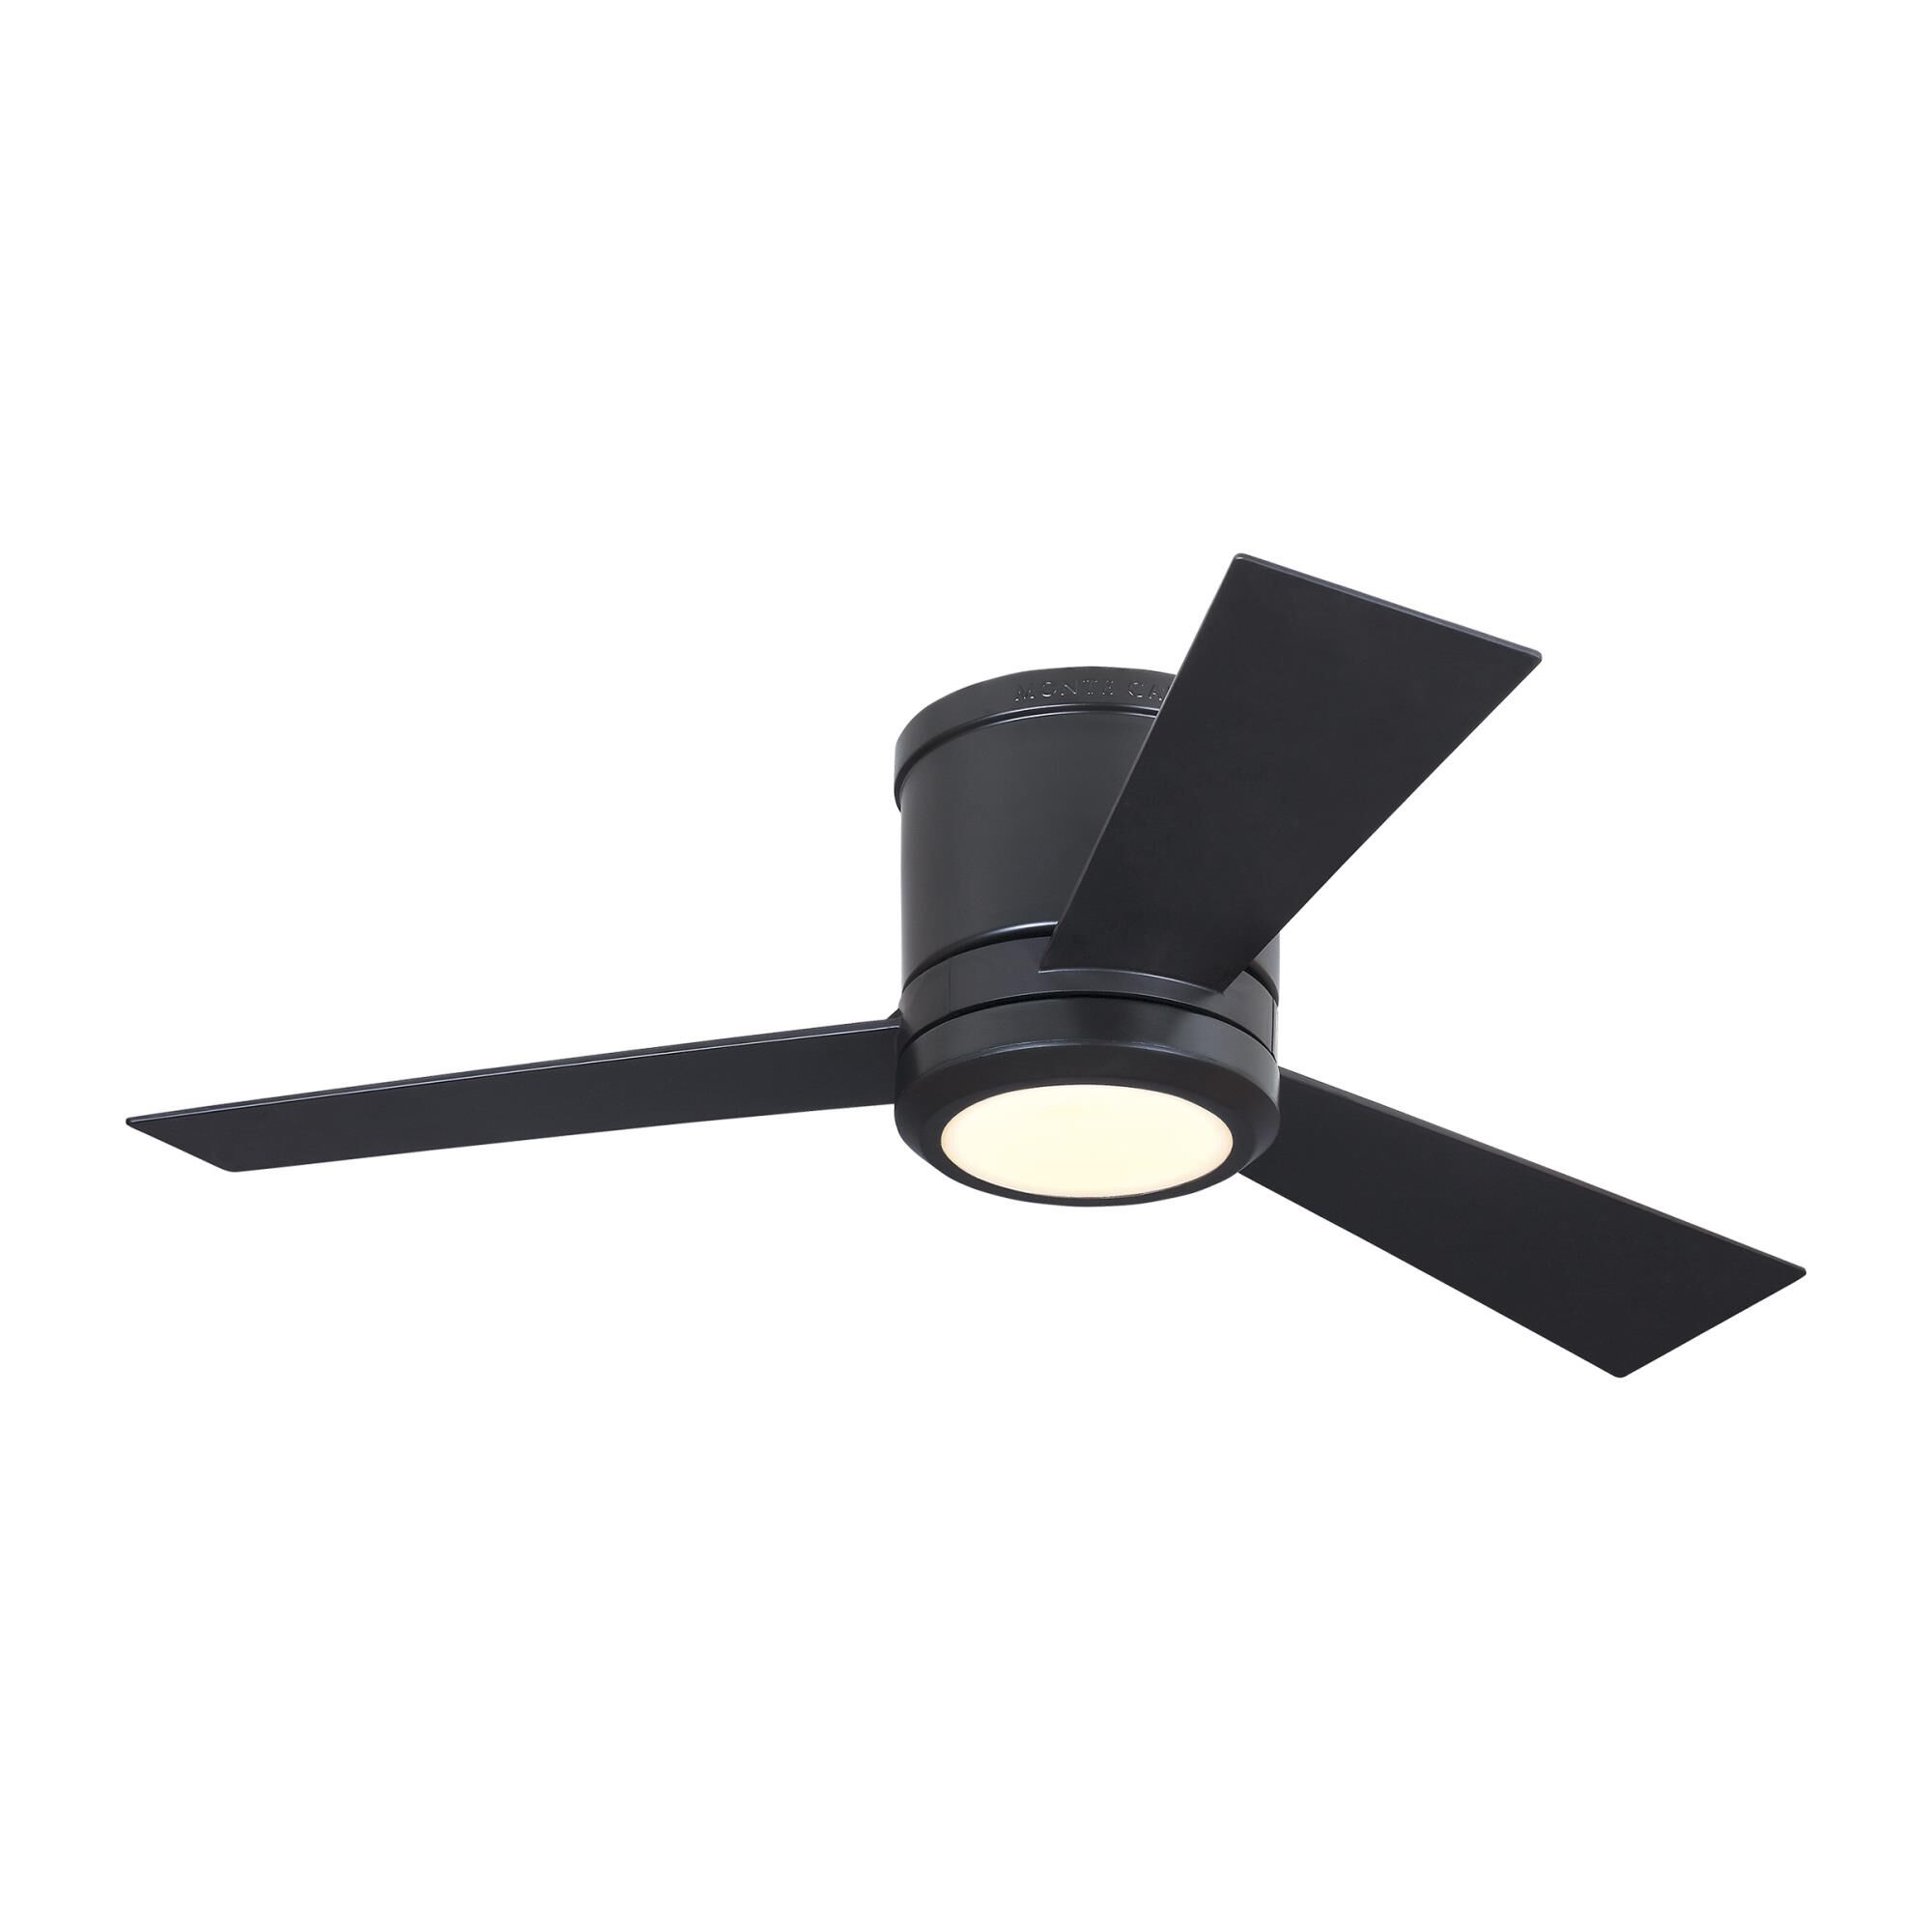 Photos - Fan Generation Lighting Clarity Ii 42 Inch Ceiling  with Light Kit Clarity